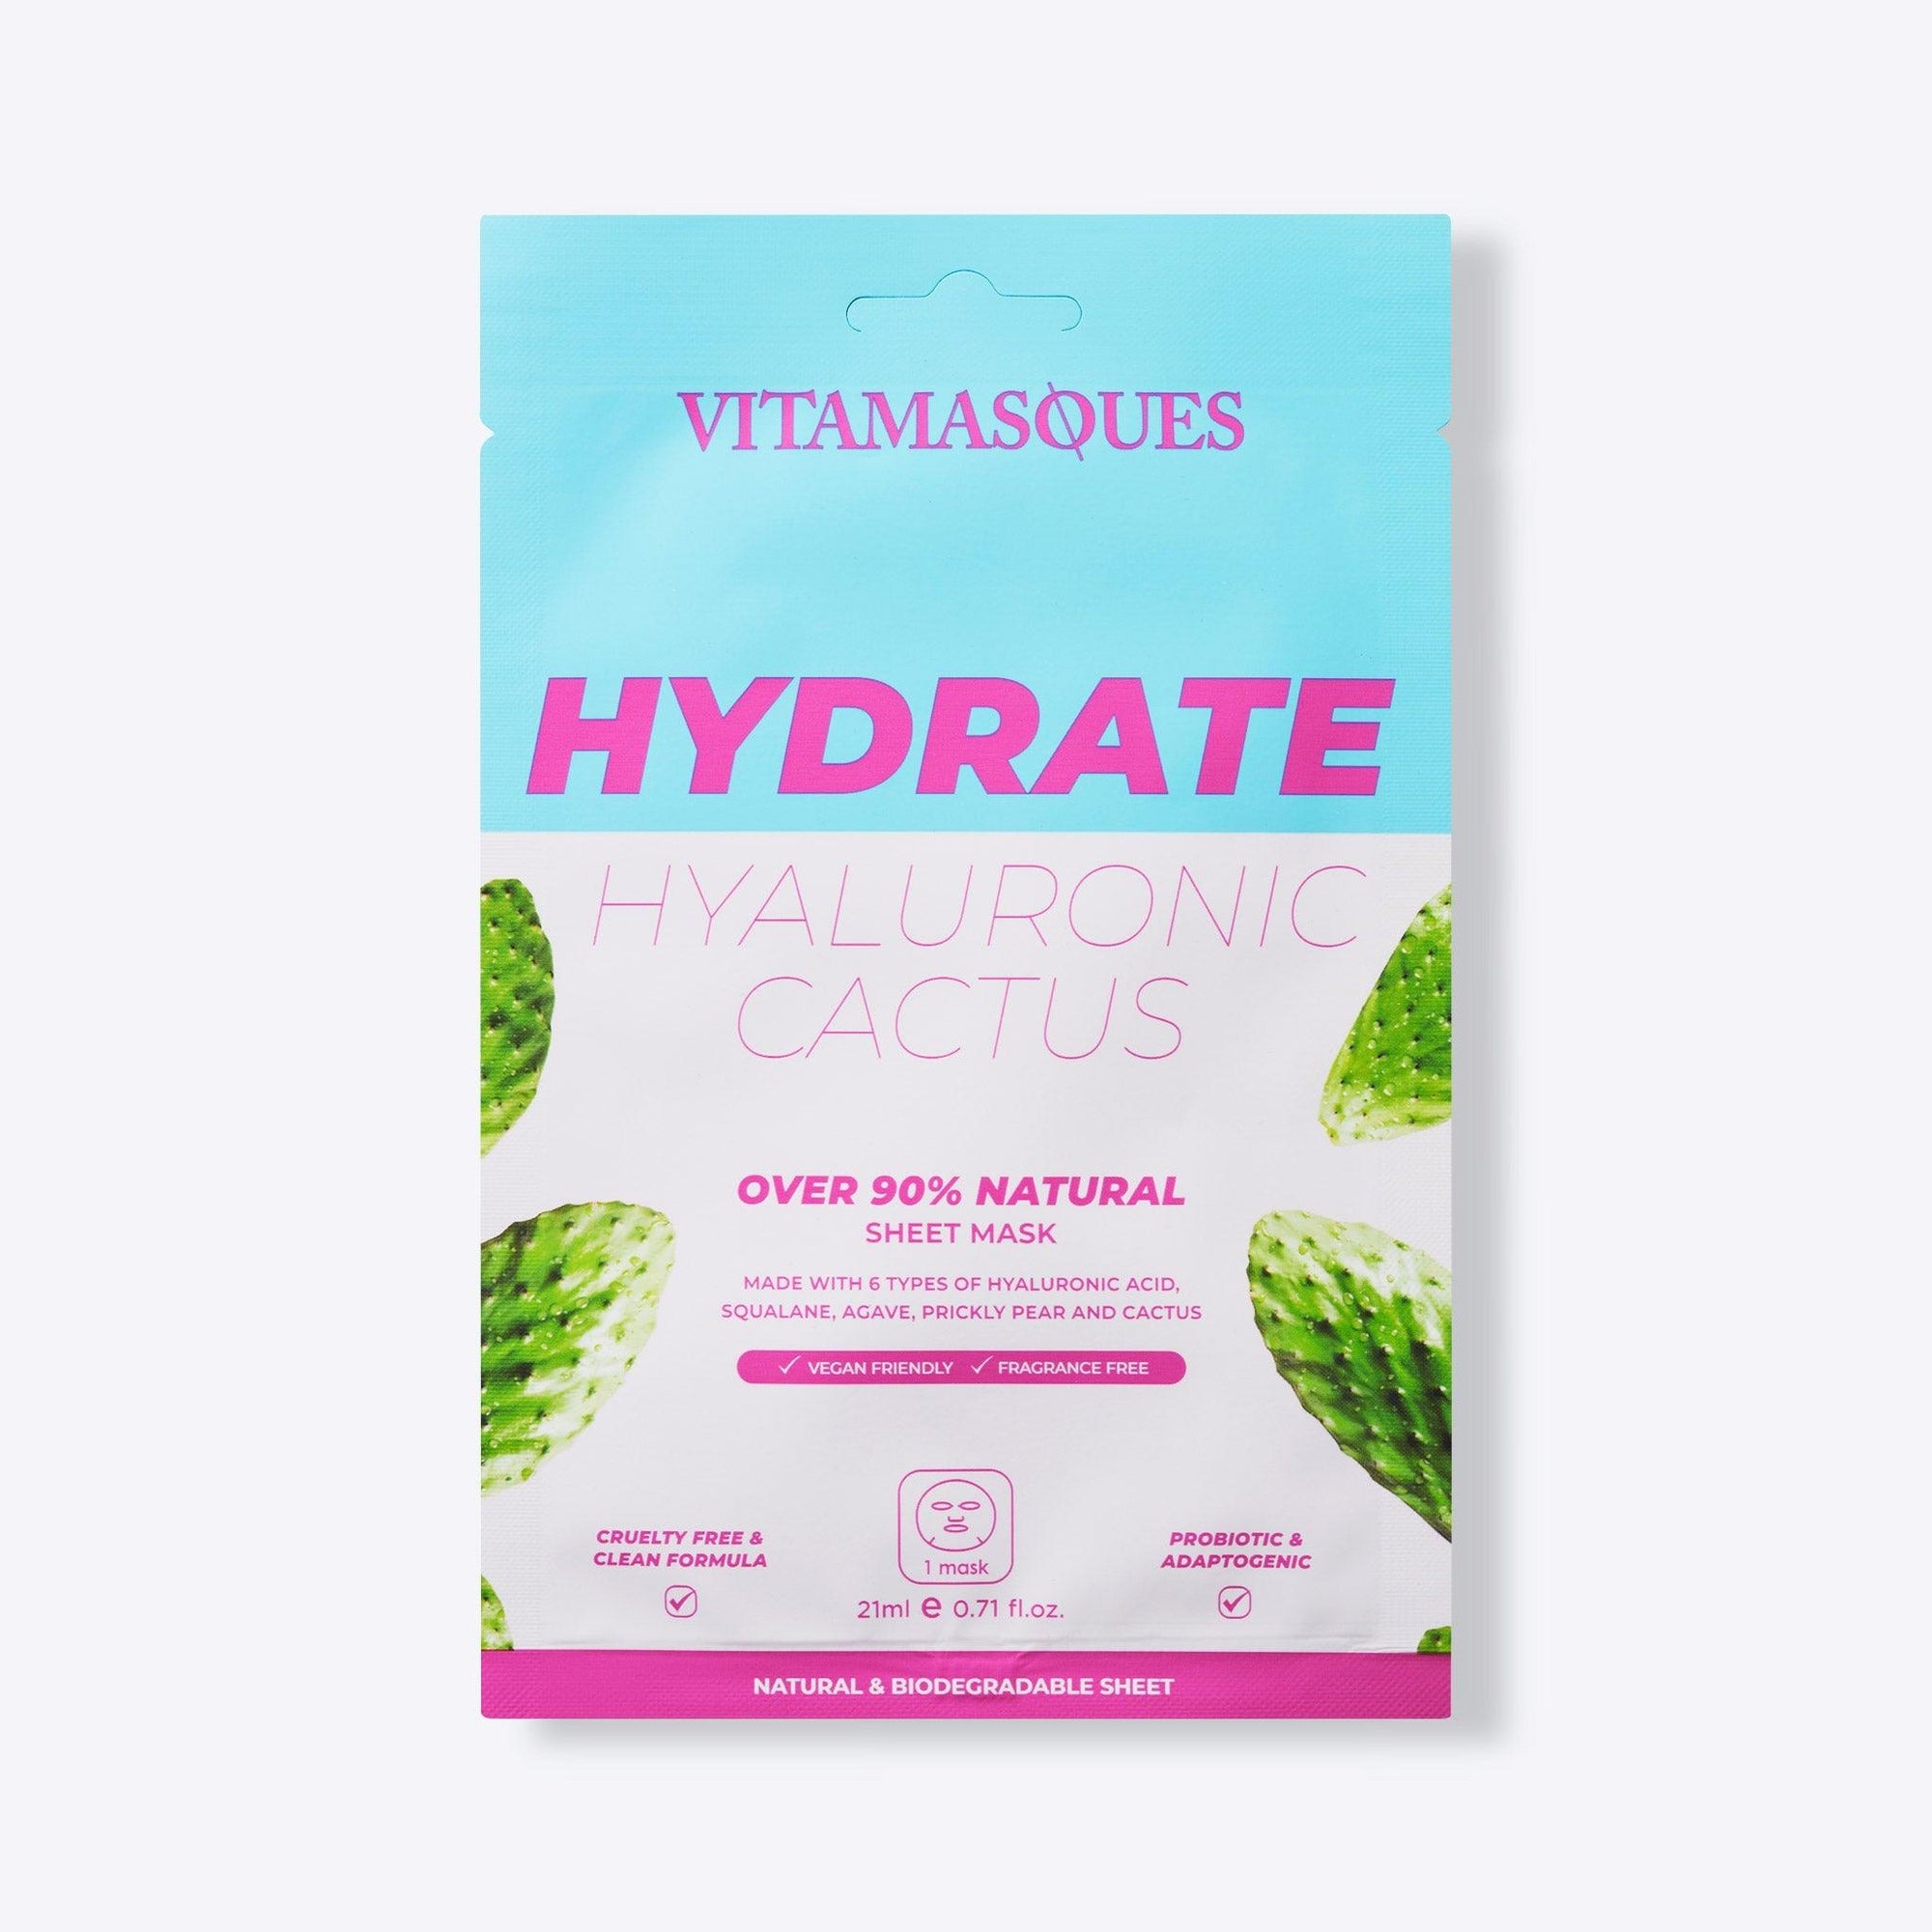 Hydrate Hyaluronic Cactus Face Sheet Mask - Vitamasques